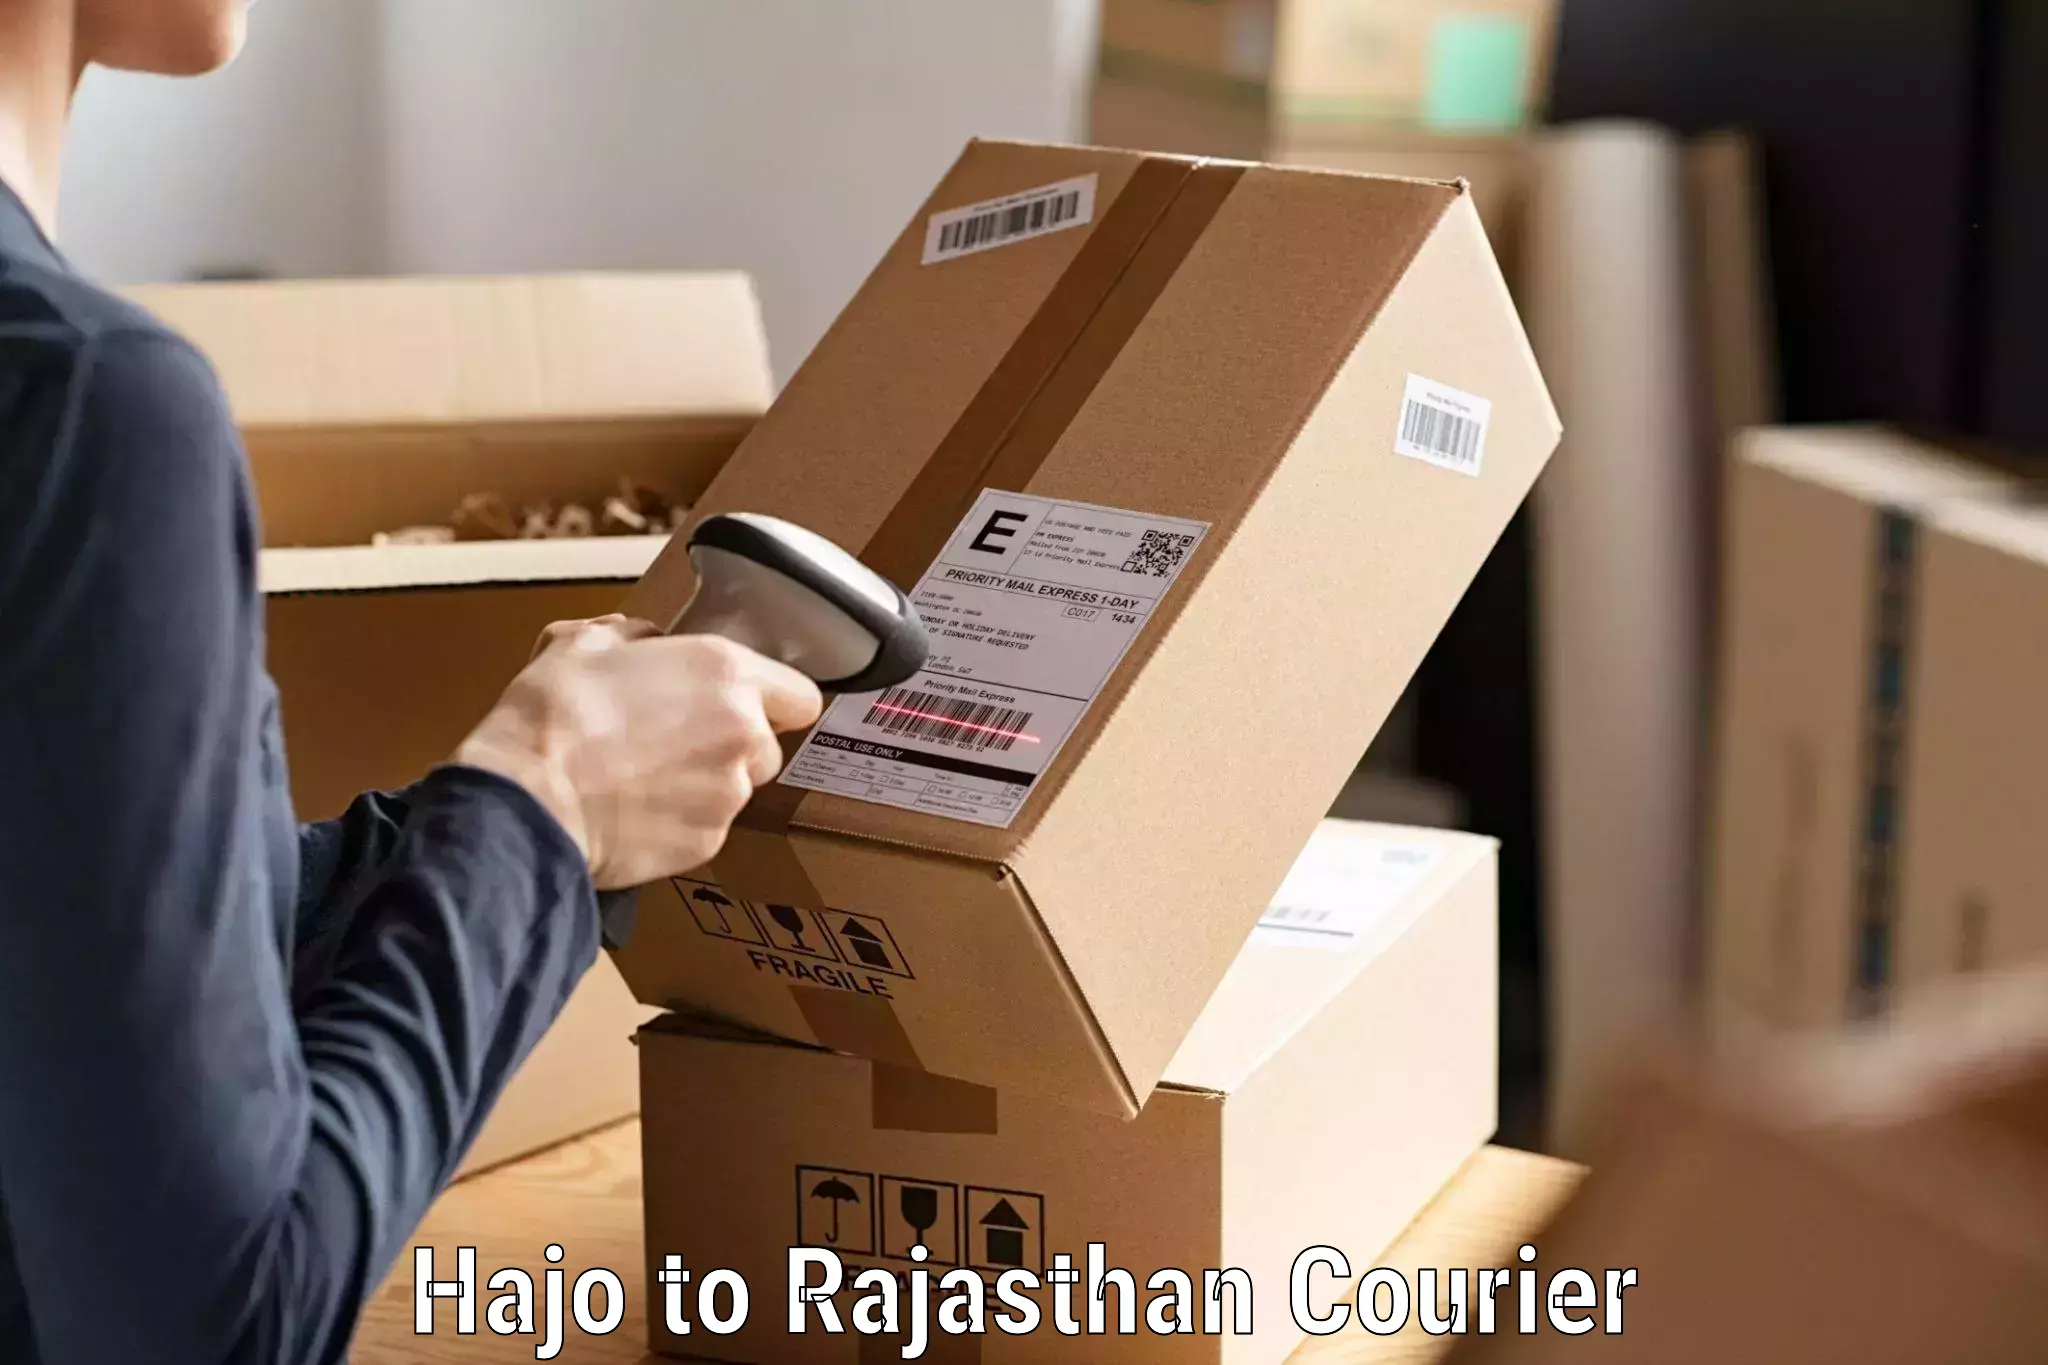 On-demand courier Hajo to Asind